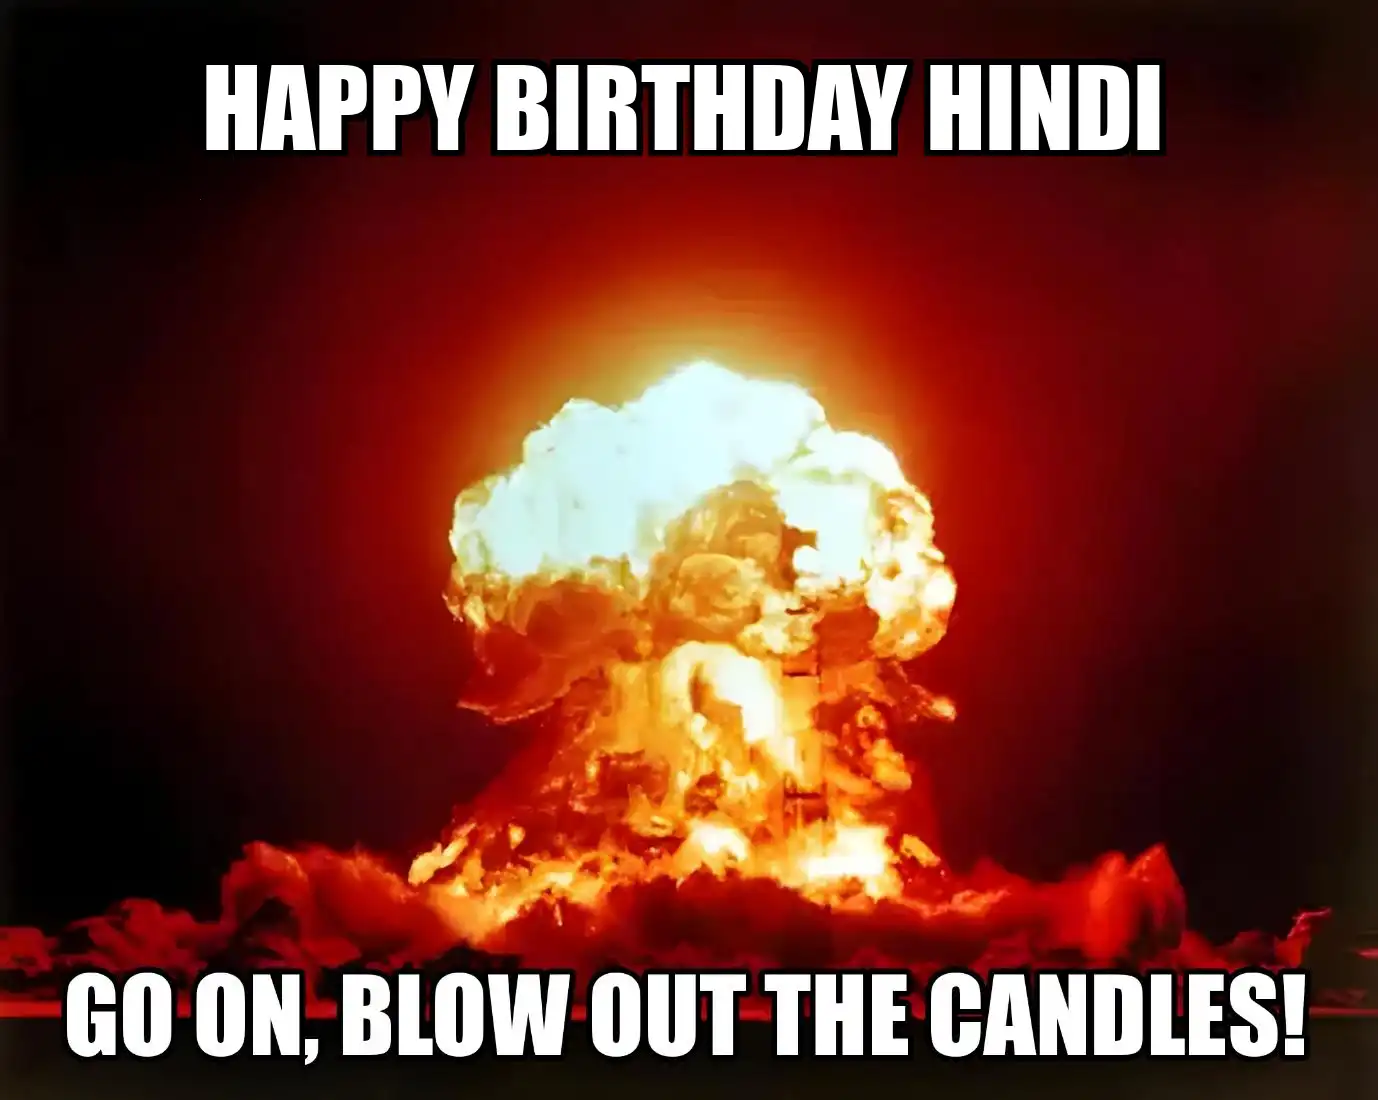 Happy Birthday Hindi Go On Blow Out The Candles Meme